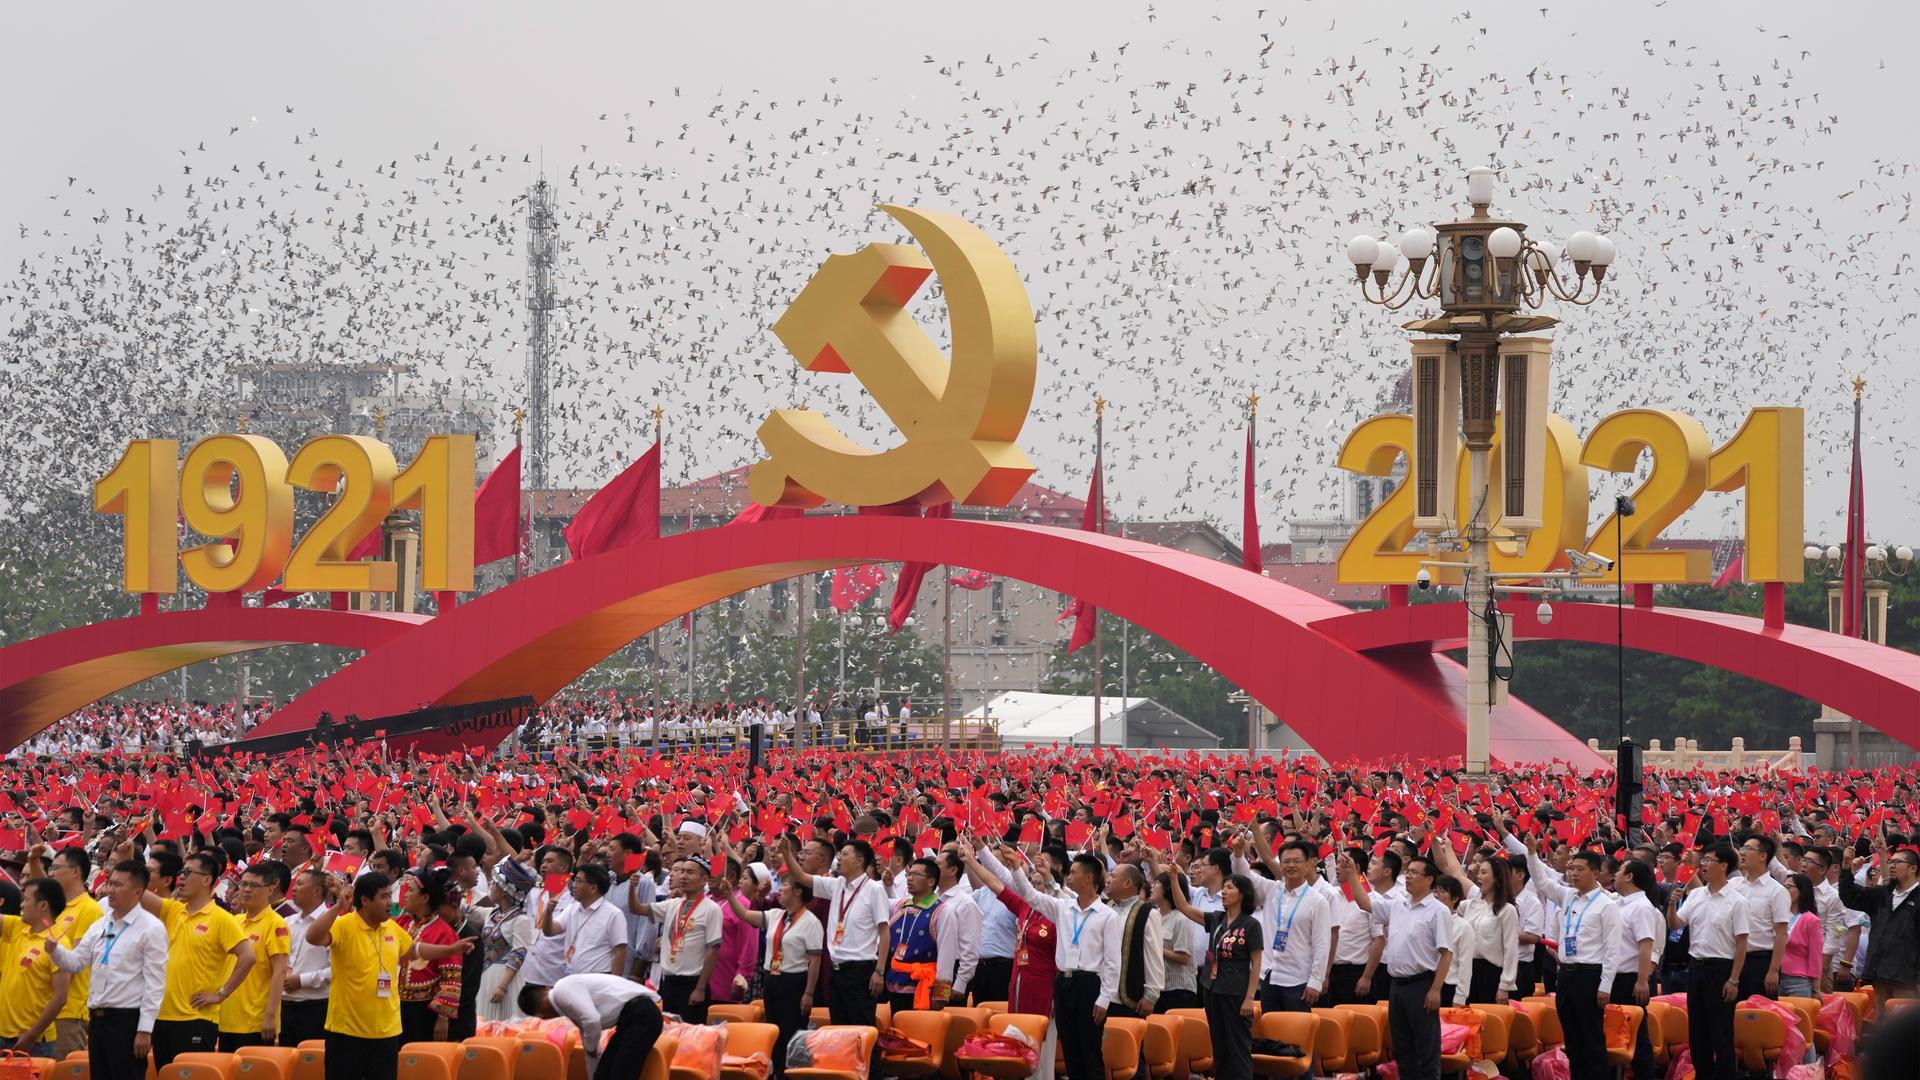 Attendees wave Chinese flags during a ceremony at Tiananmen Square to mark the 100th anniversary of the founding of the ruling Chinese Communist Party in Beijing